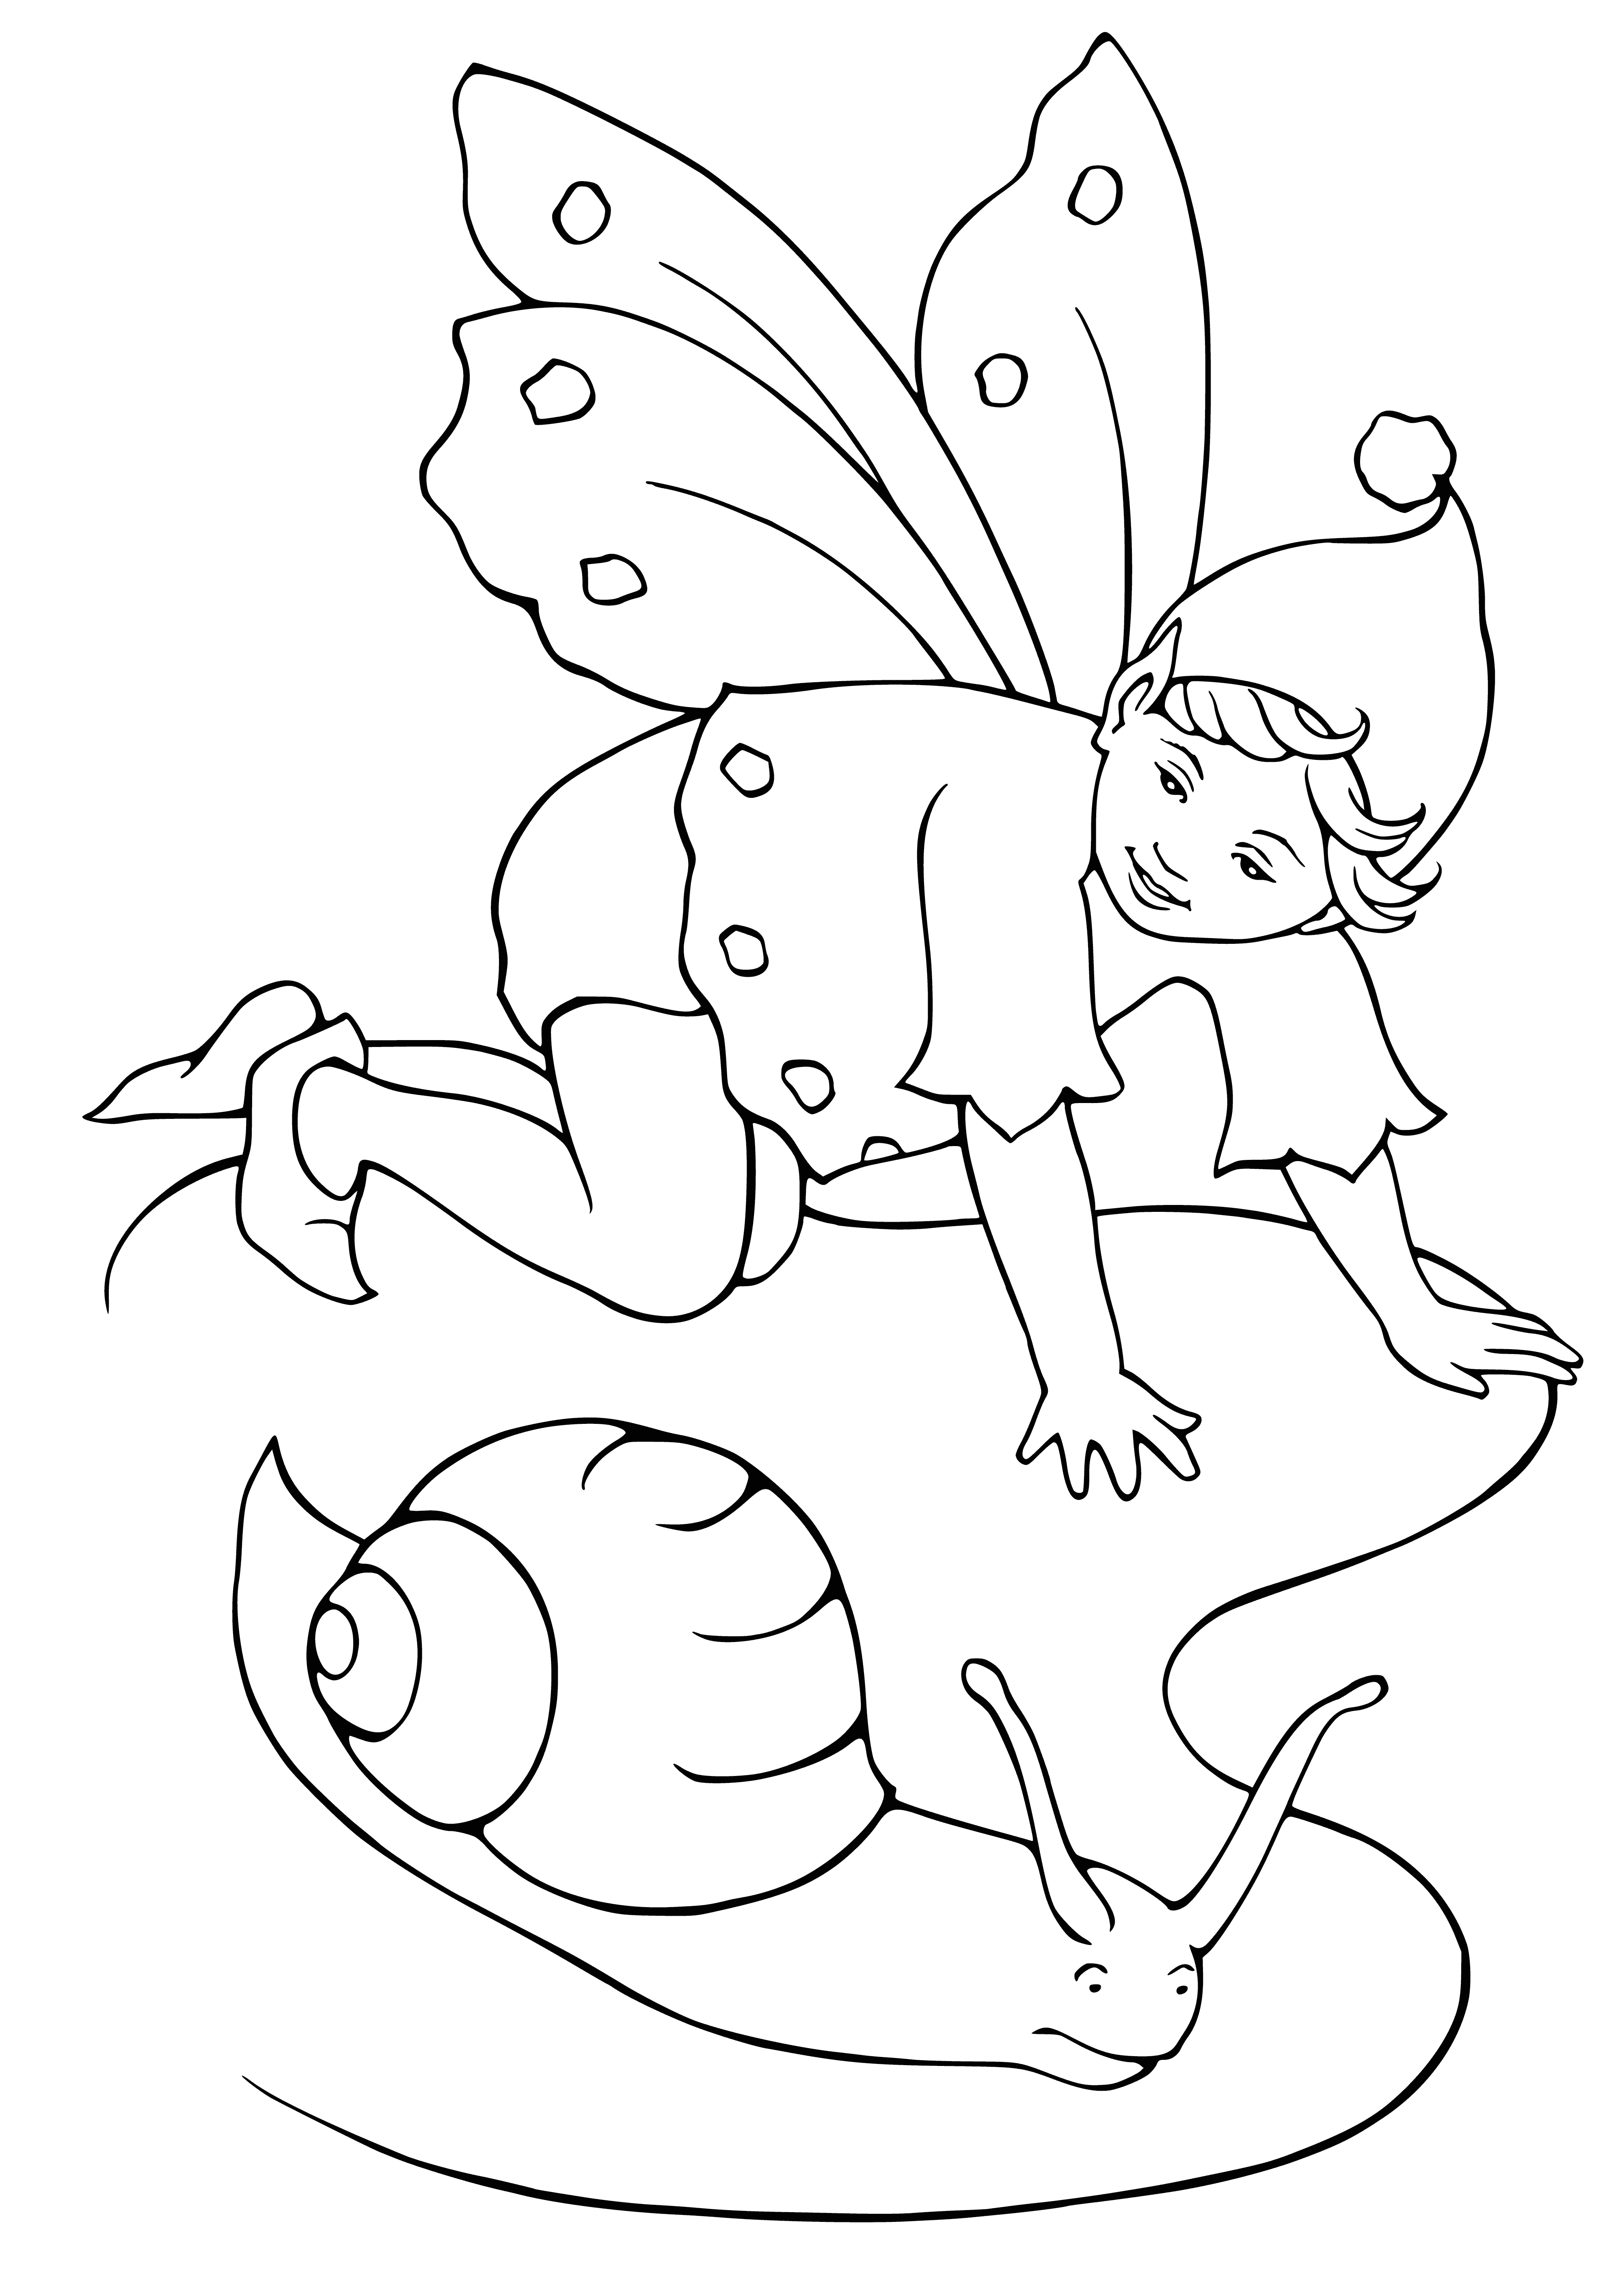 Elf watching a snail coloring page